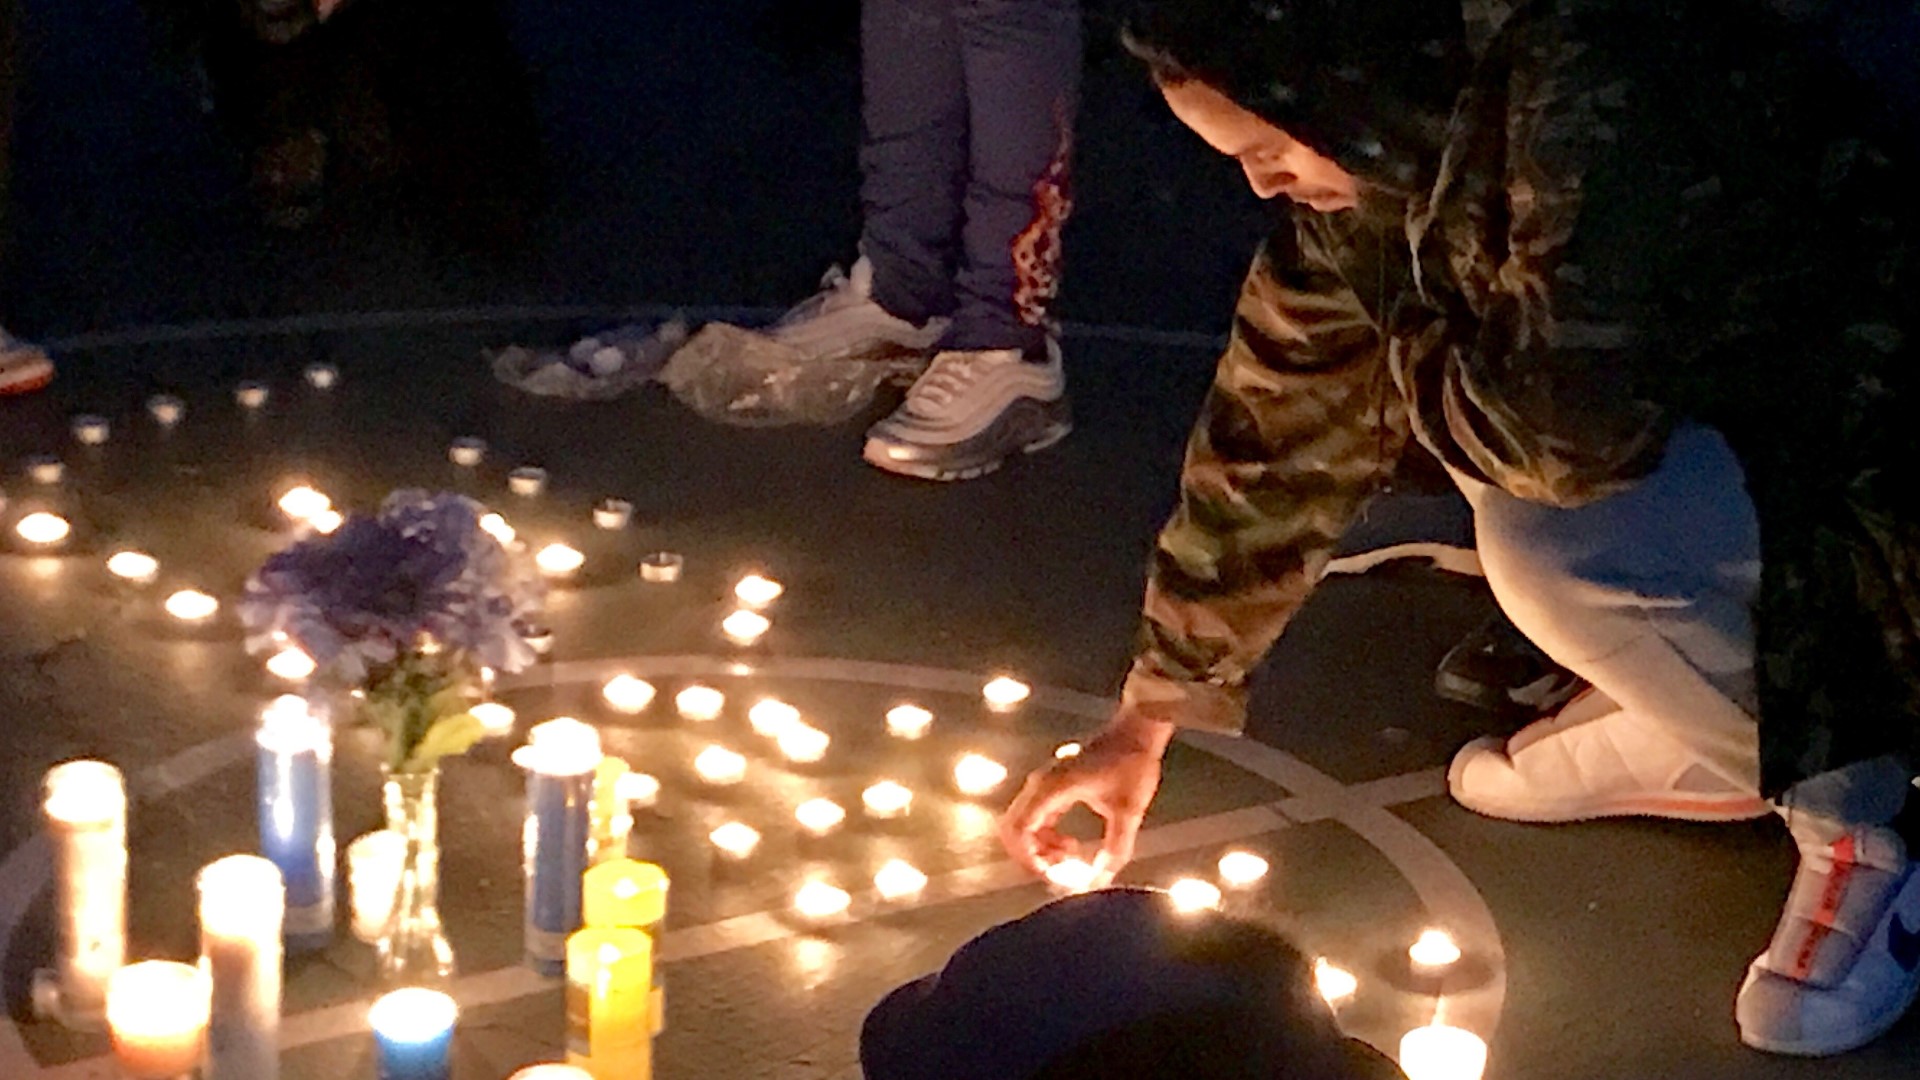 Sacramento 'Hometown Hero' Anthony Sadler co-organized a local vigil for Nipsey Hussle, Tuesday evening, in Sacramento's McKinley Park. Sadler tells ABC10 Nipsey Hussle was one of *his* heroes.